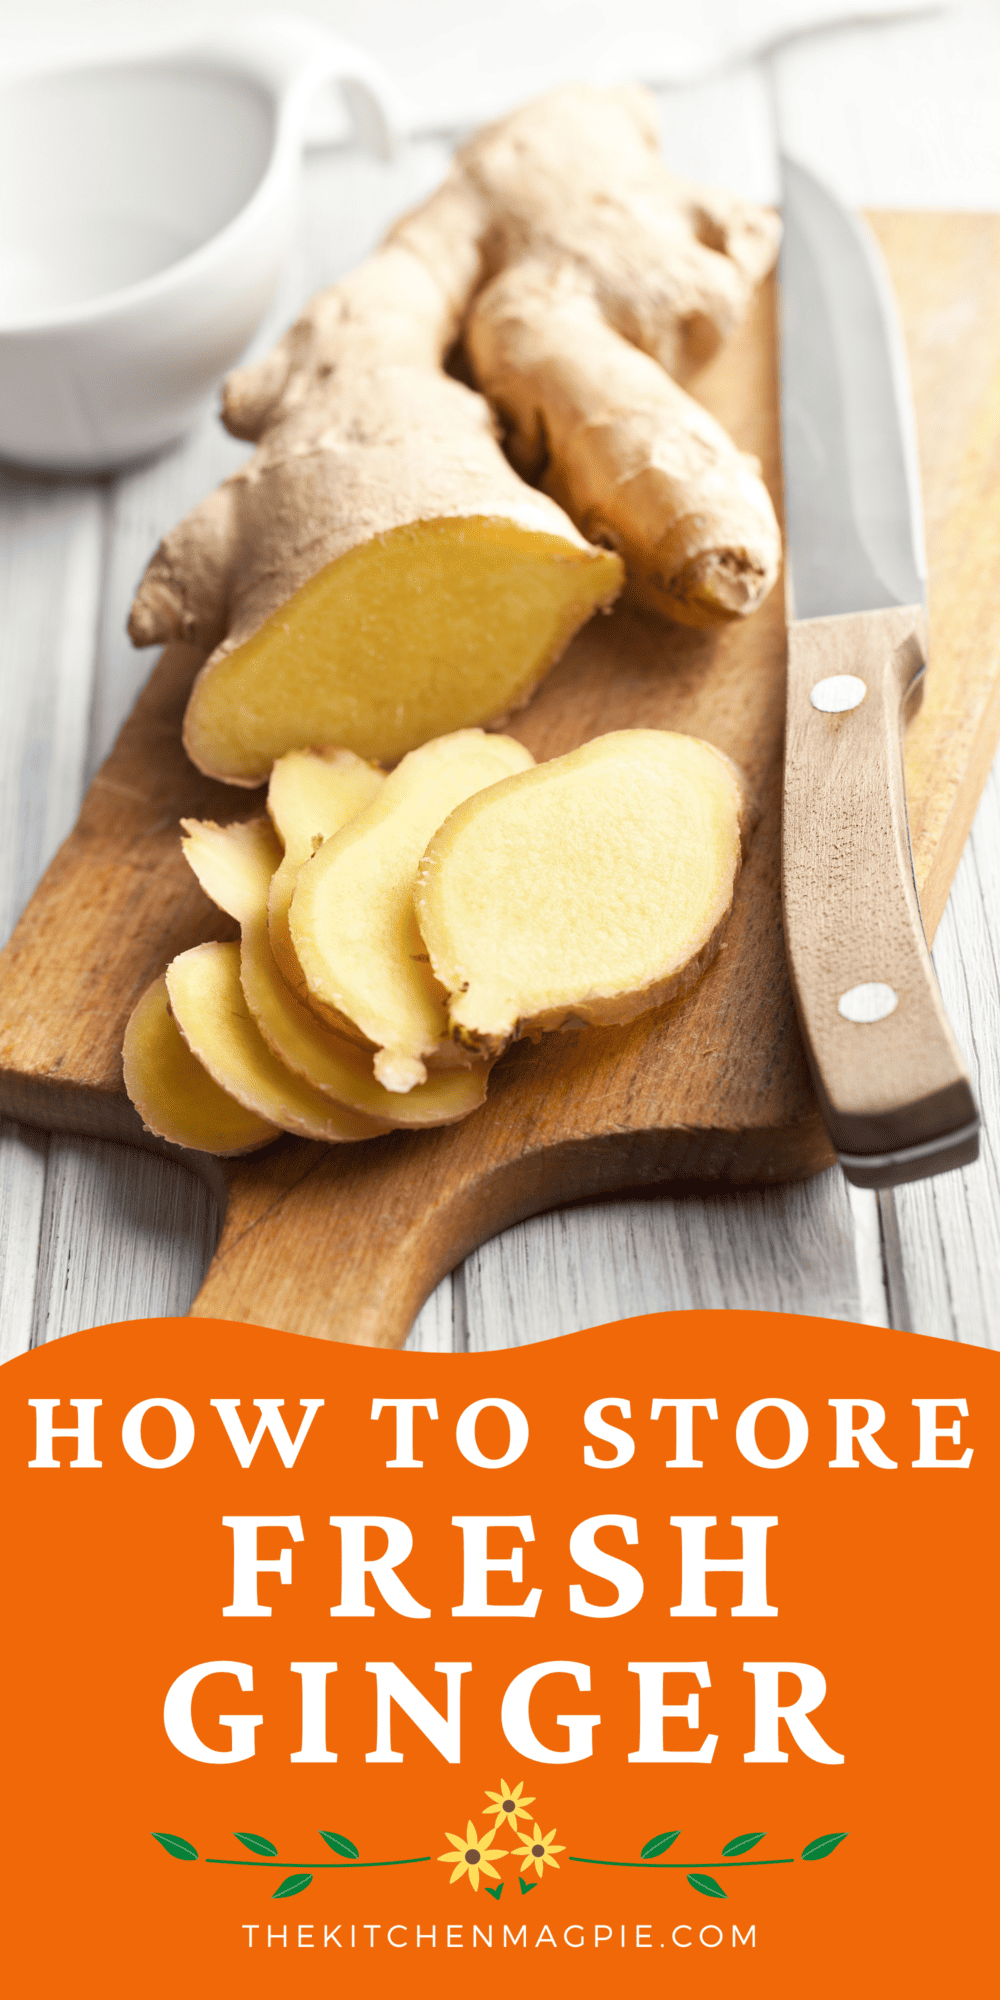 Easy ways to store fresh ginger is a snap!